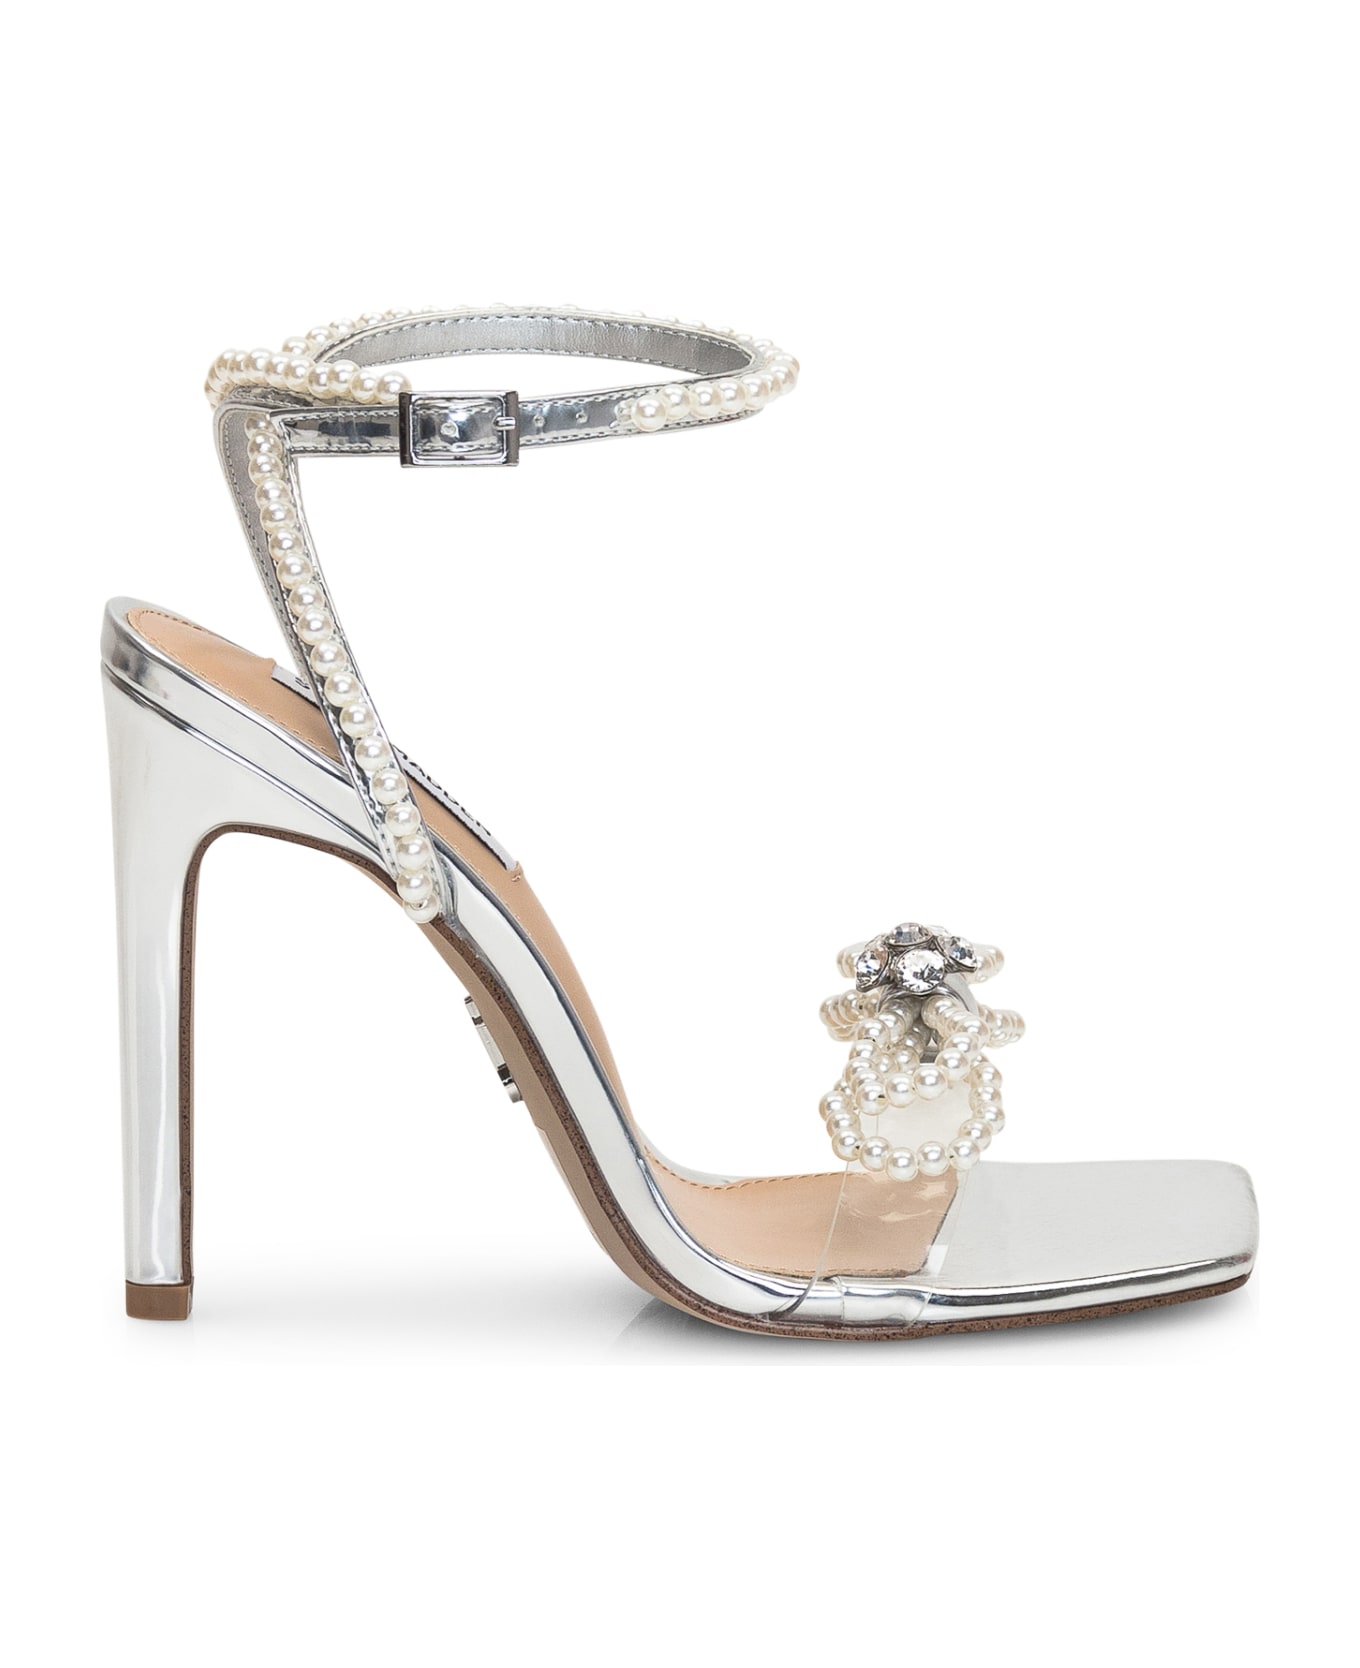 Steve Madden Sandal With Pearls - SILVER サンダル